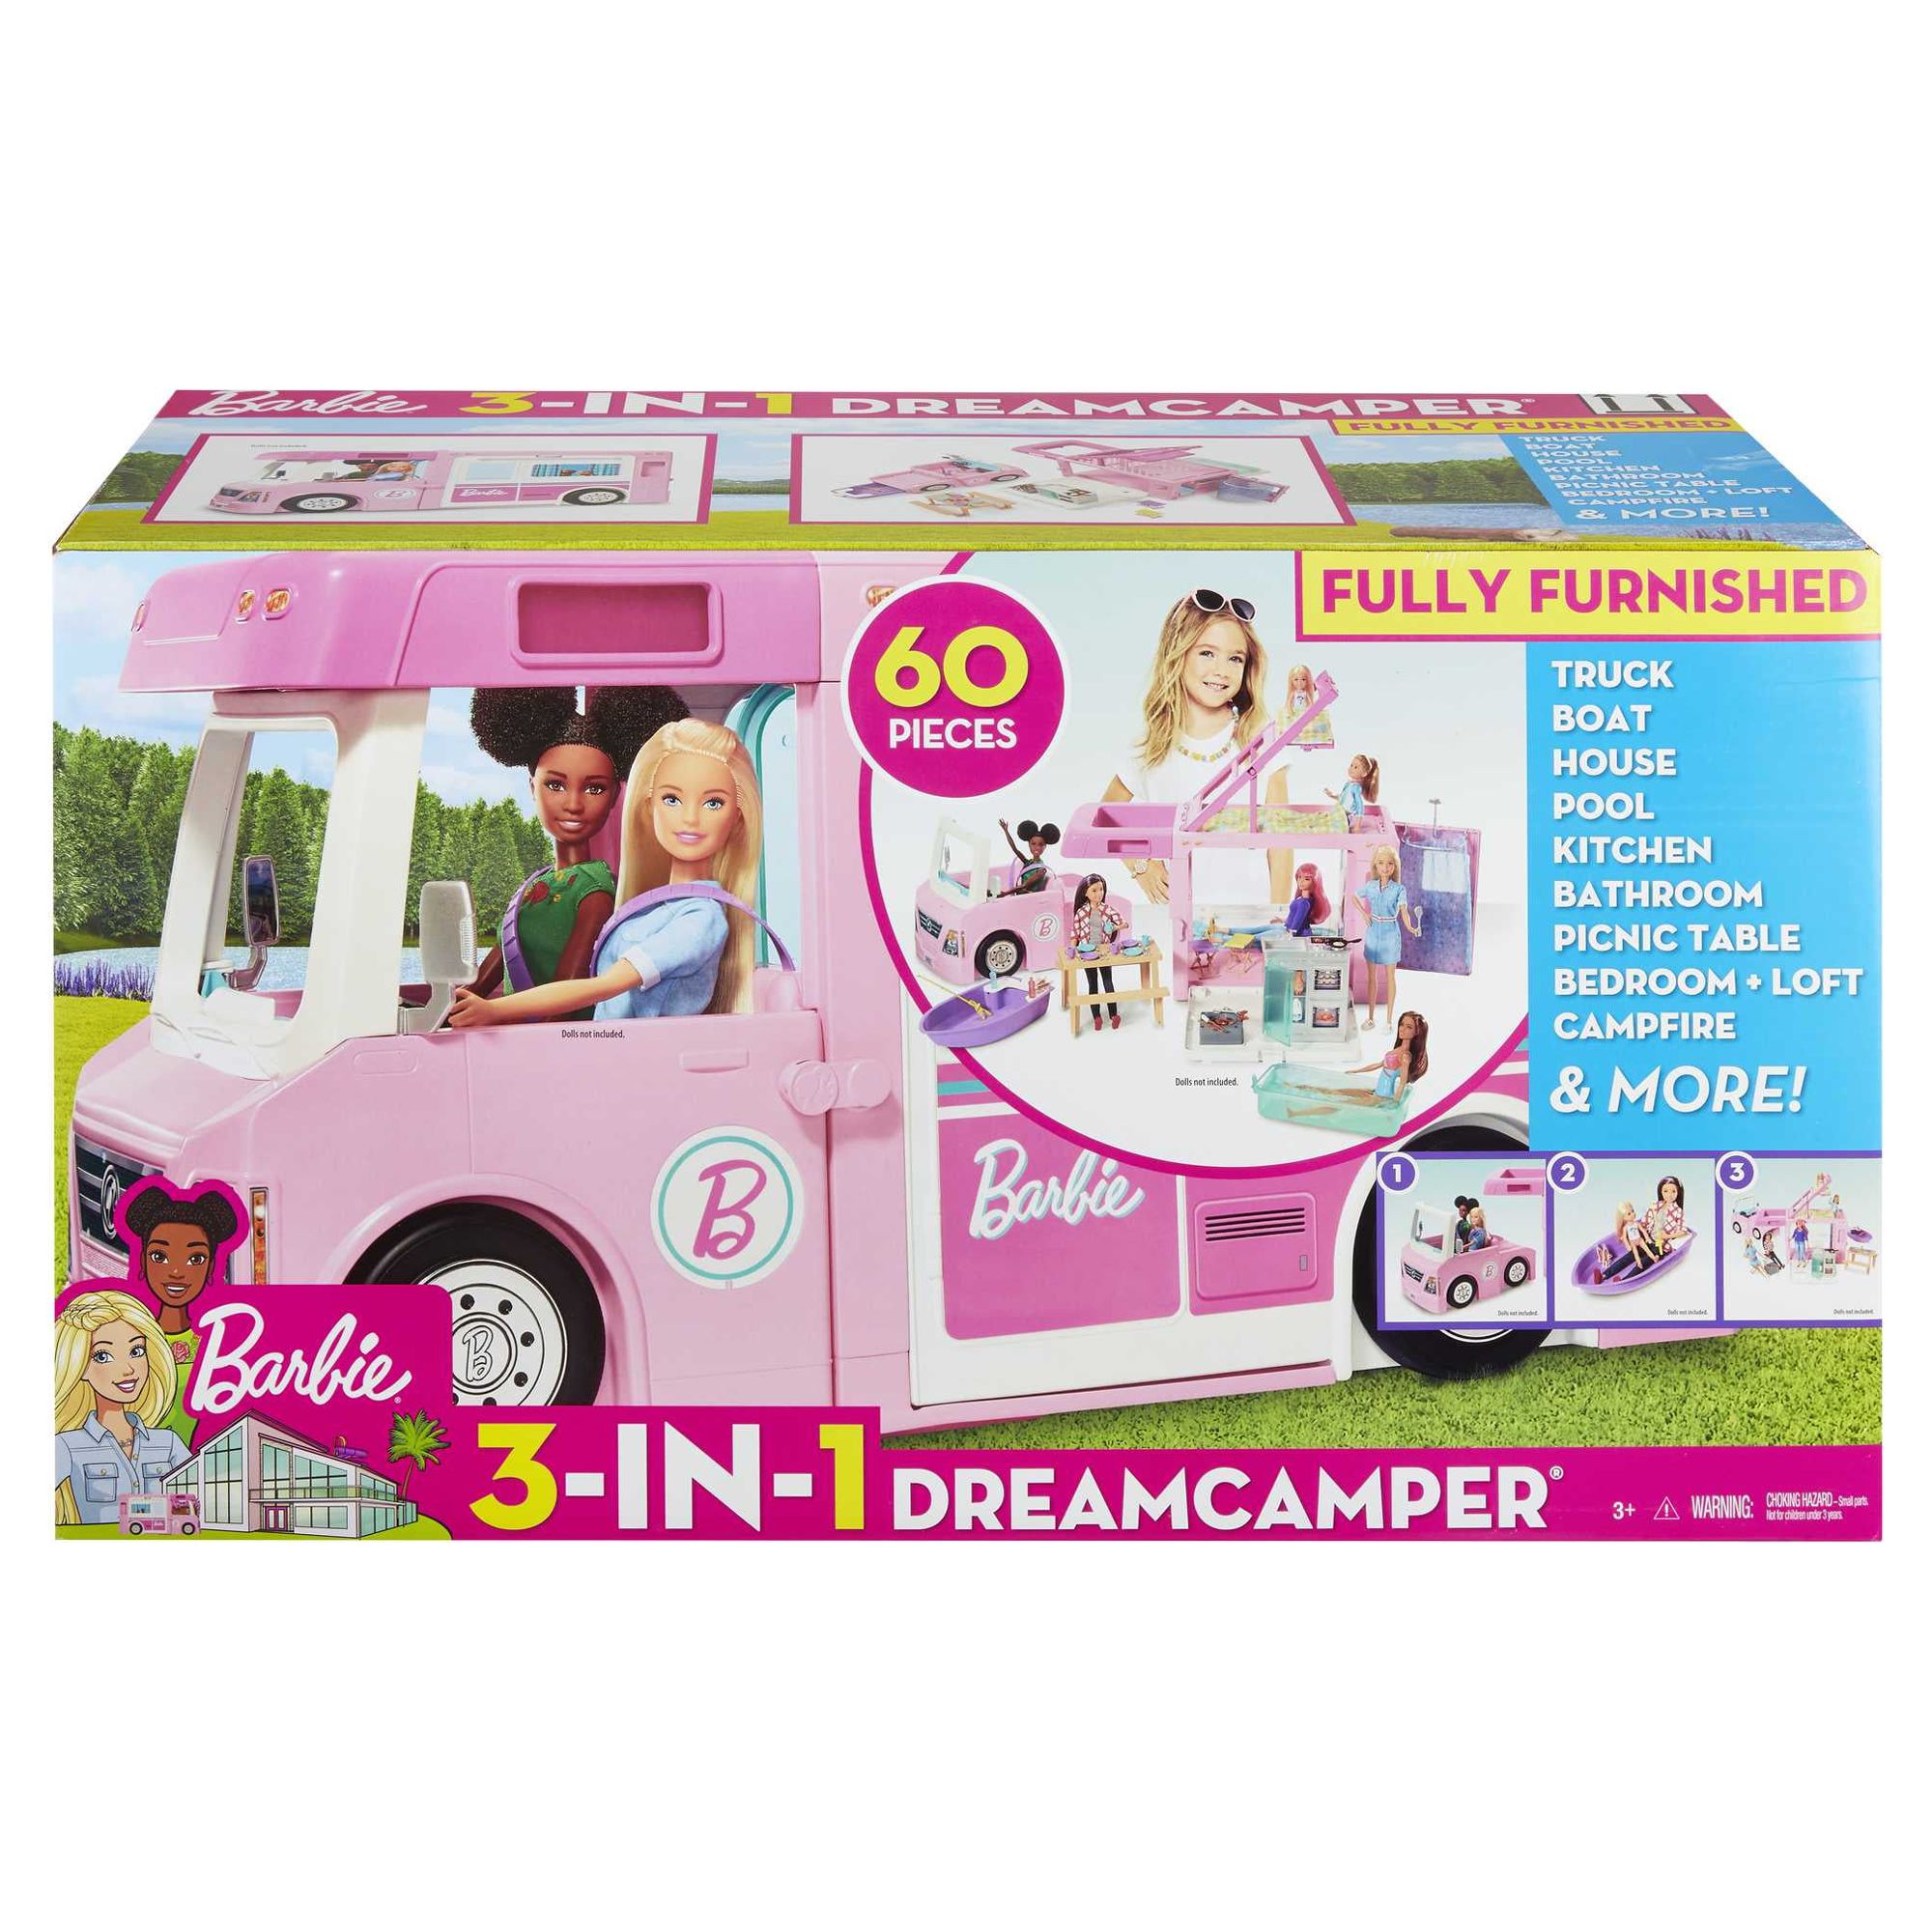 Barbie 3-in-1 DreamCamper Playset (Truck, Boat and House) with Pool and 50 Accessories - image 7 of 7